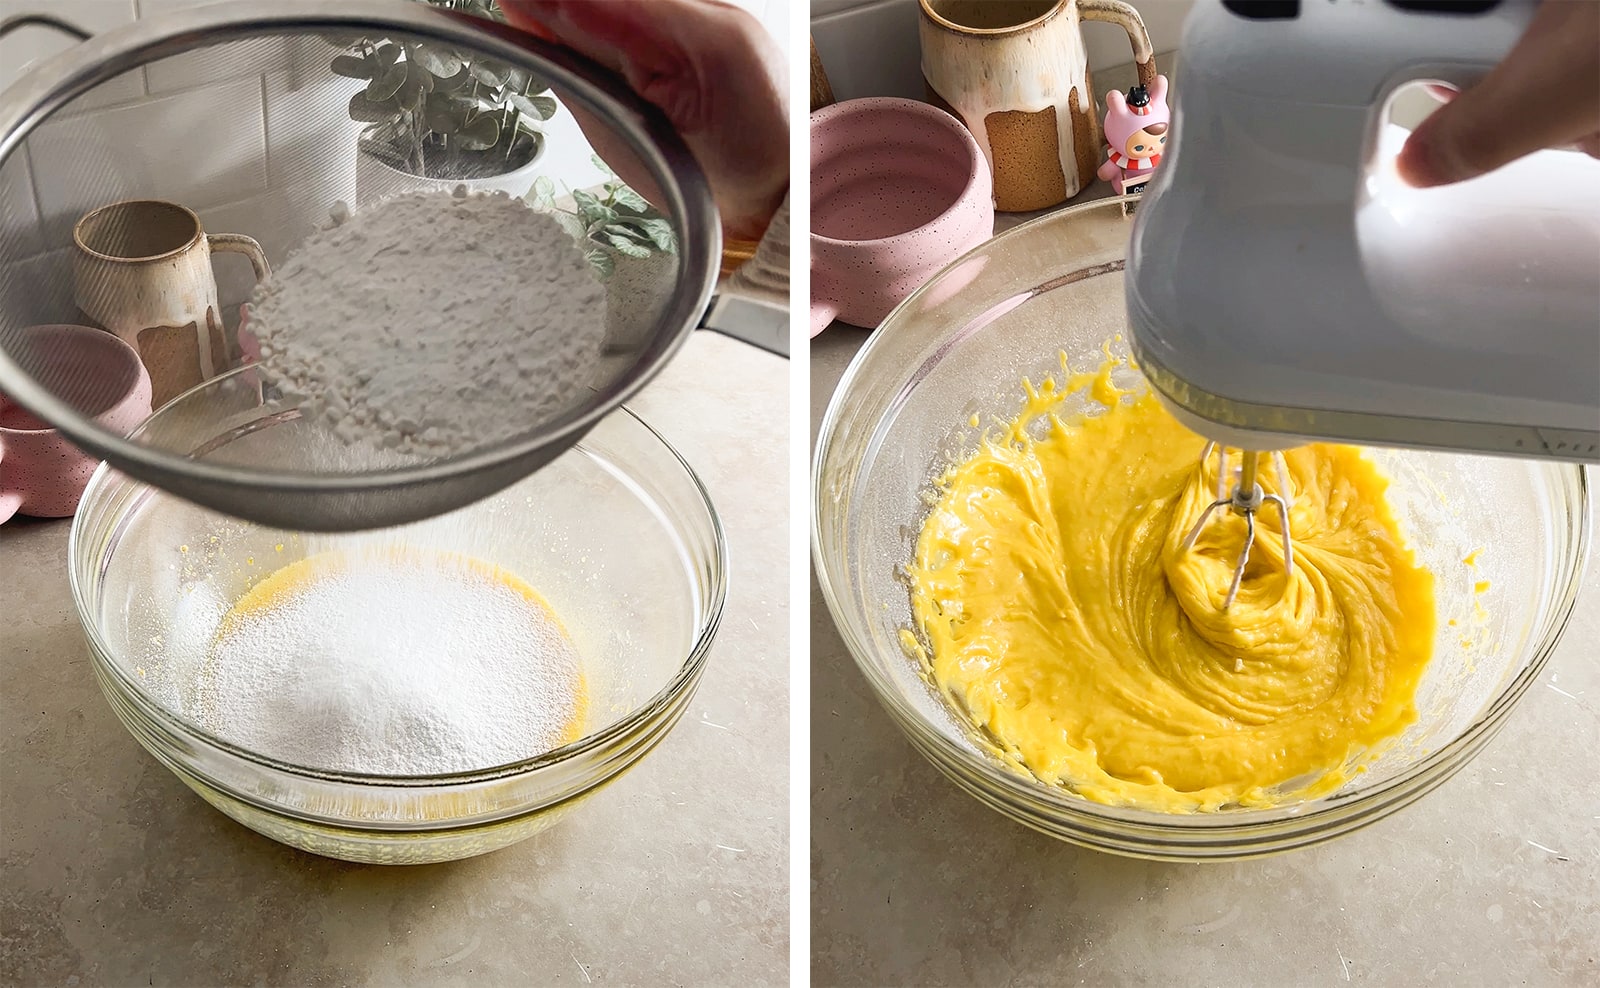 Left to right: sifting flour into egg yolk mixture, mixing flour into egg yolk mixture with a hand mixer.